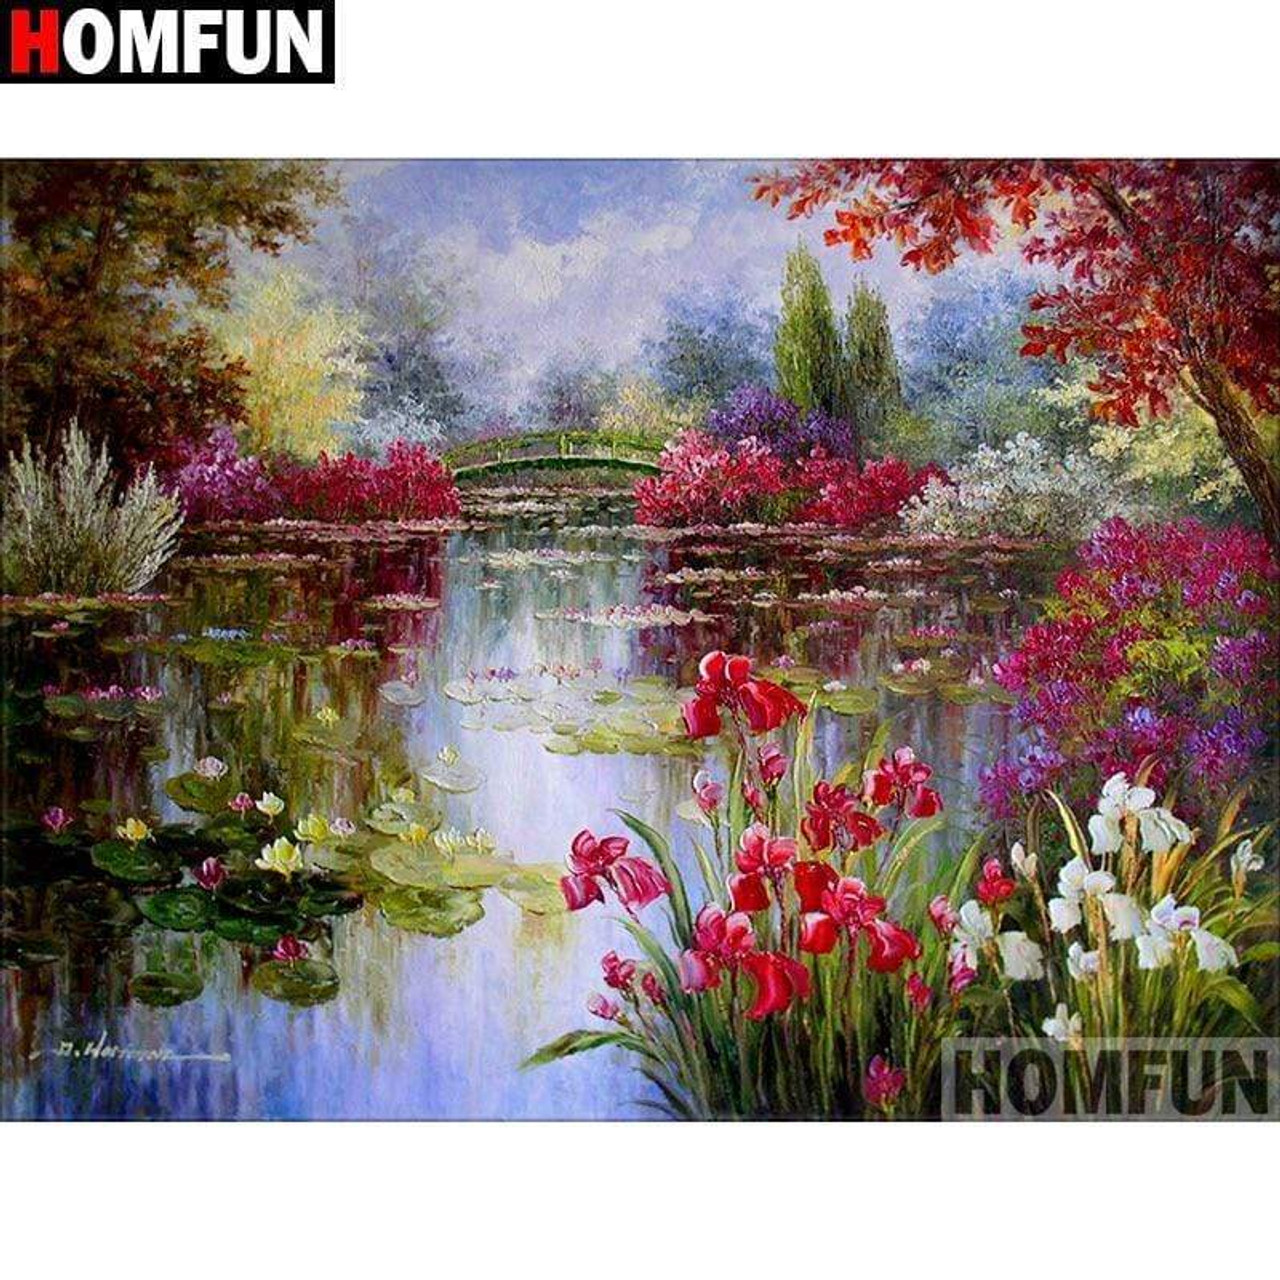 https://cdn11.bigcommerce.com/s-xf1j2e32mt/images/stencil/1280x1280/products/8156/10097/5d-diamond-painting-flowers-by-the-pond-kit-7418745127015__70507.1631116331.jpg?c=1